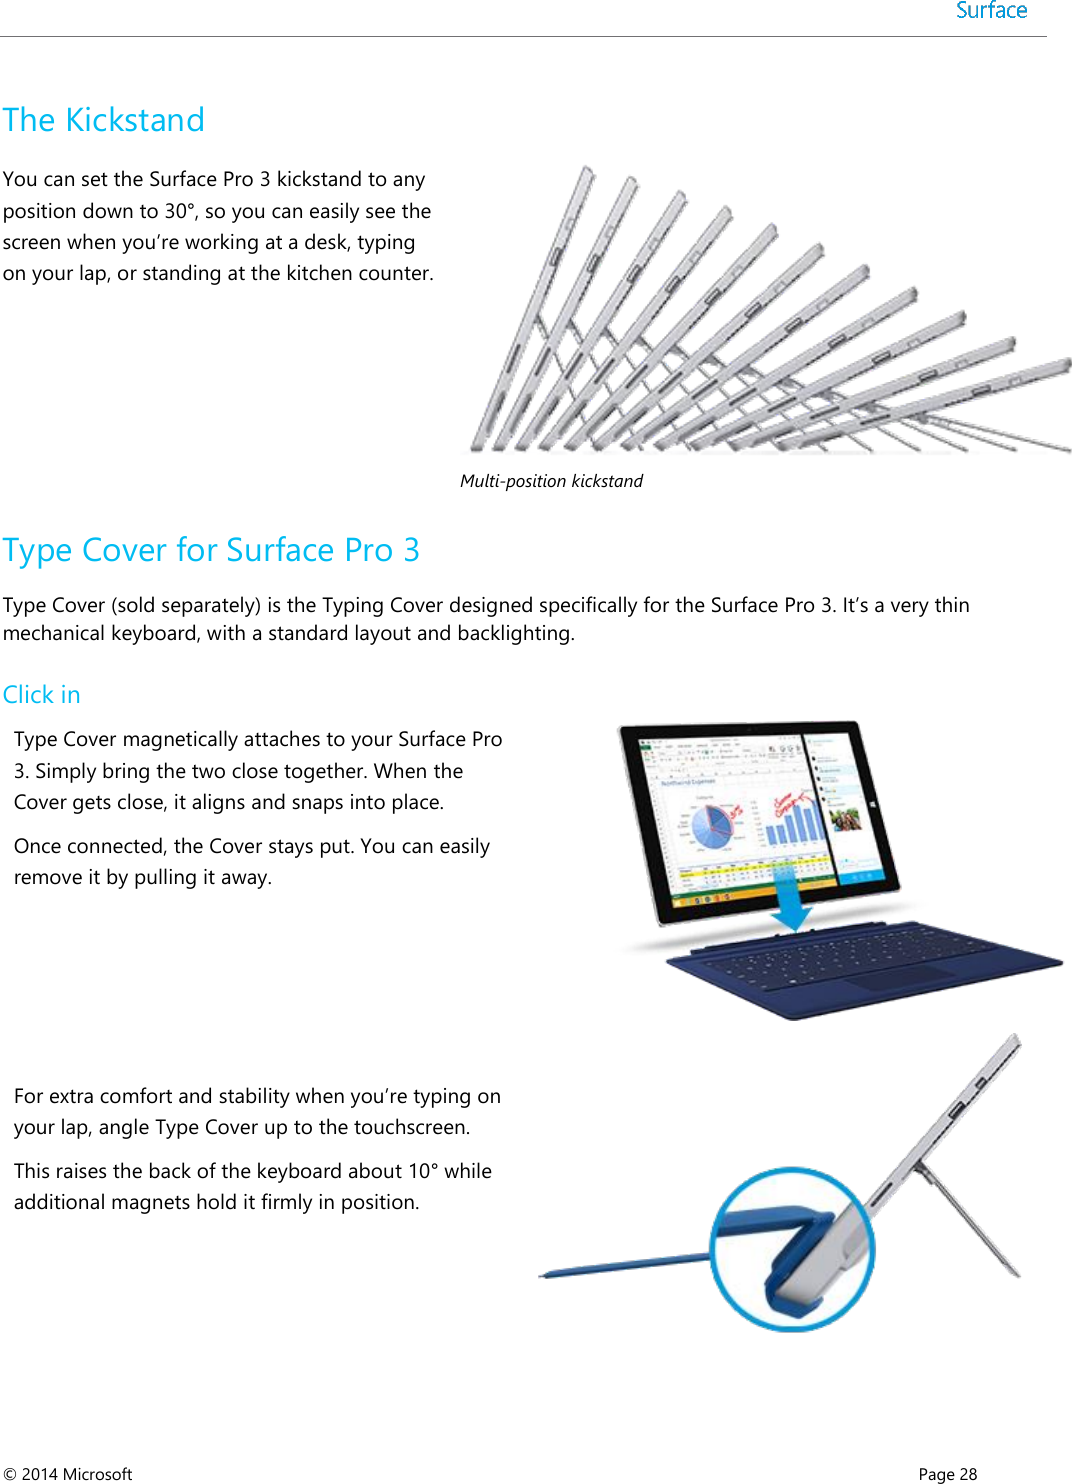  © 2014 Microsoft      Page 28  The Kickstand You can set the Surface Pro 3 kickstand to any position down to 30°, so you can easily see the screen when you’re working at a desk, typing on your lap, or standing at the kitchen counter.   Multi-position kickstand Type Cover for Surface Pro 3 Type Cover (sold separately) is the Typing Cover designed specifically for the Surface Pro 3. It’s a very thin mechanical keyboard, with a standard layout and backlighting.  Click in  Type Cover magnetically attaches to your Surface Pro 3. Simply bring the two close together. When the Cover gets close, it aligns and snaps into place.  Once connected, the Cover stays put. You can easily remove it by pulling it away.    For extra comfort and stability when you’re typing on your lap, angle Type Cover up to the touchscreen.  This raises the back of the keyboard about 10° while additional magnets hold it firmly in position.   